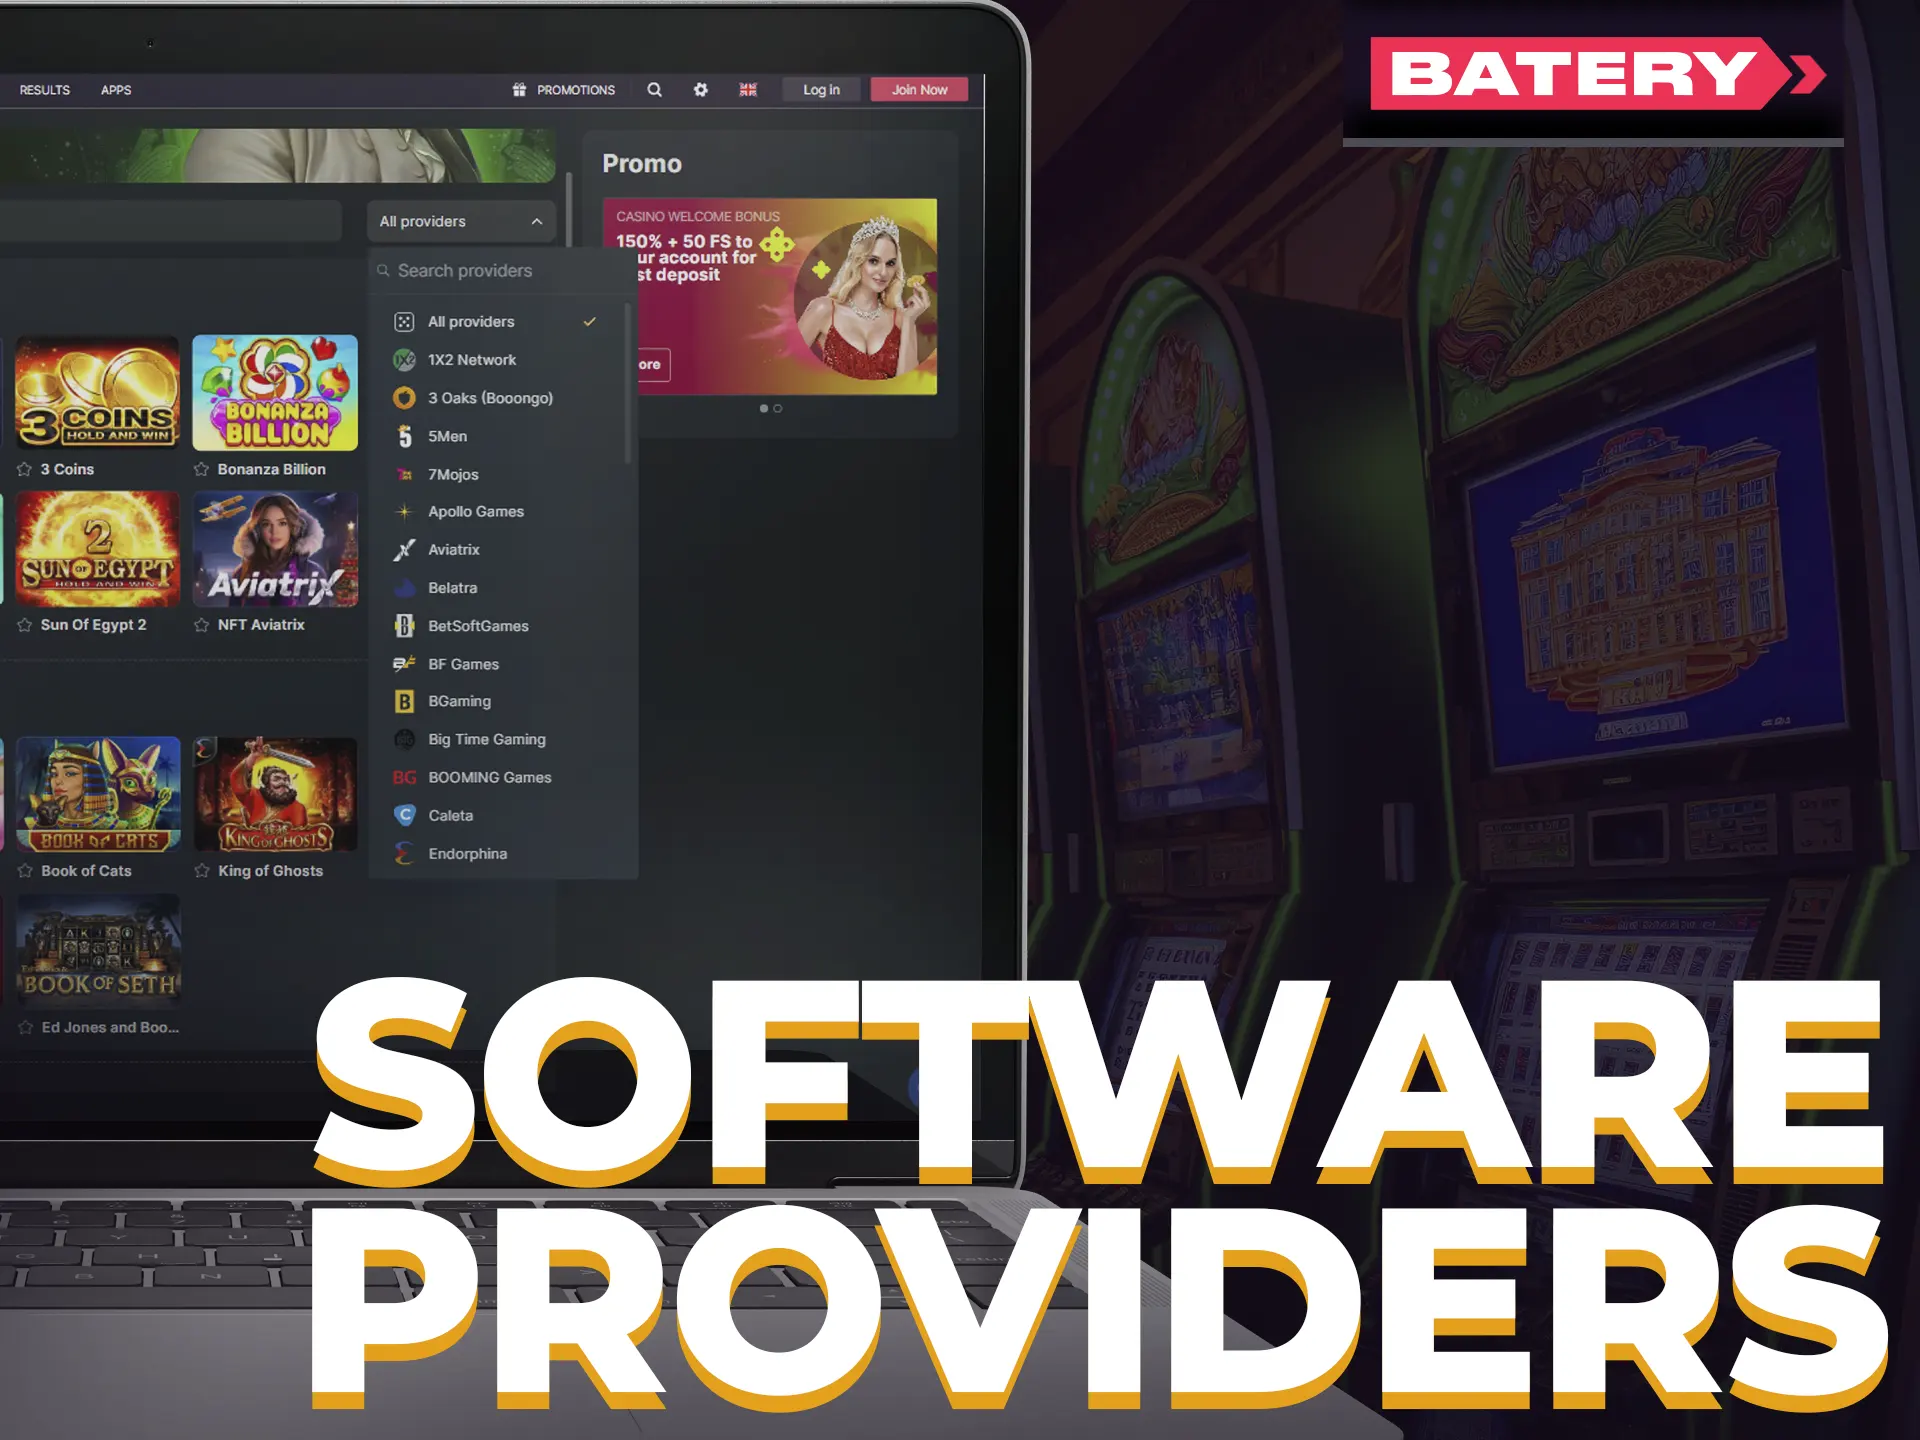 Batery Casino offers games from top providers like NetEnt, Evolution Gaming, and Betsoft.